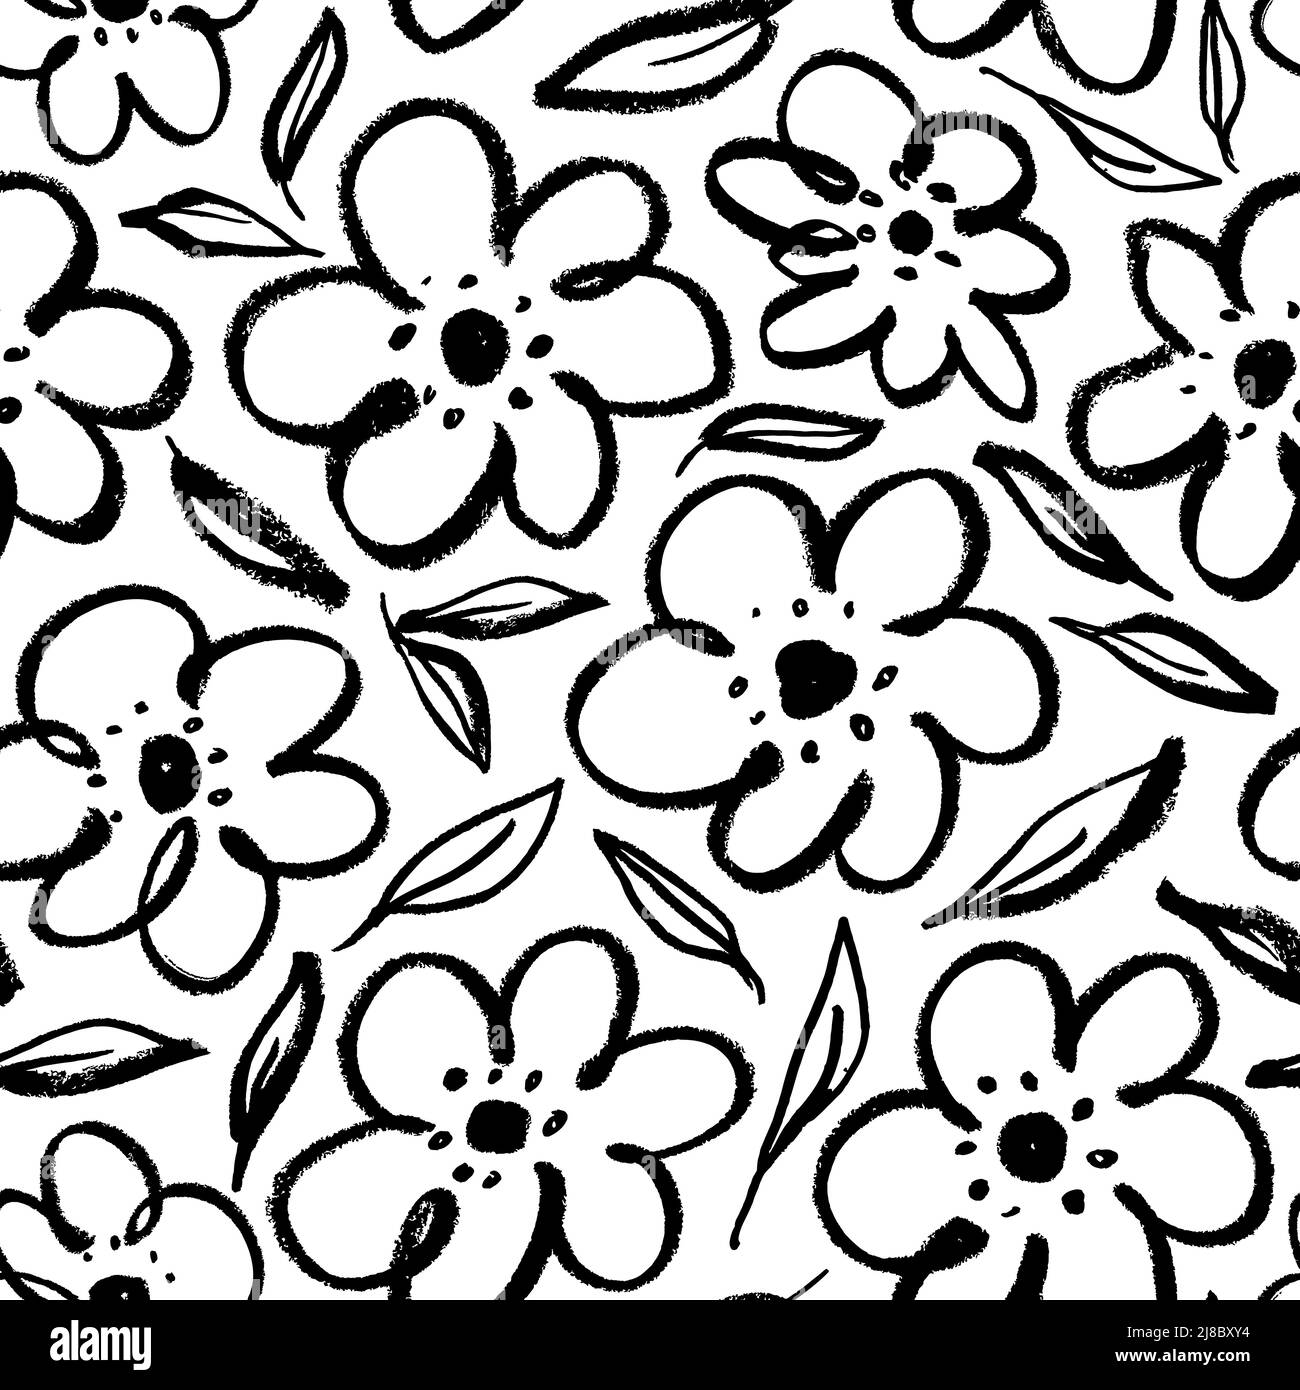 Childish style simple black flowers with leaves. Stock Vector